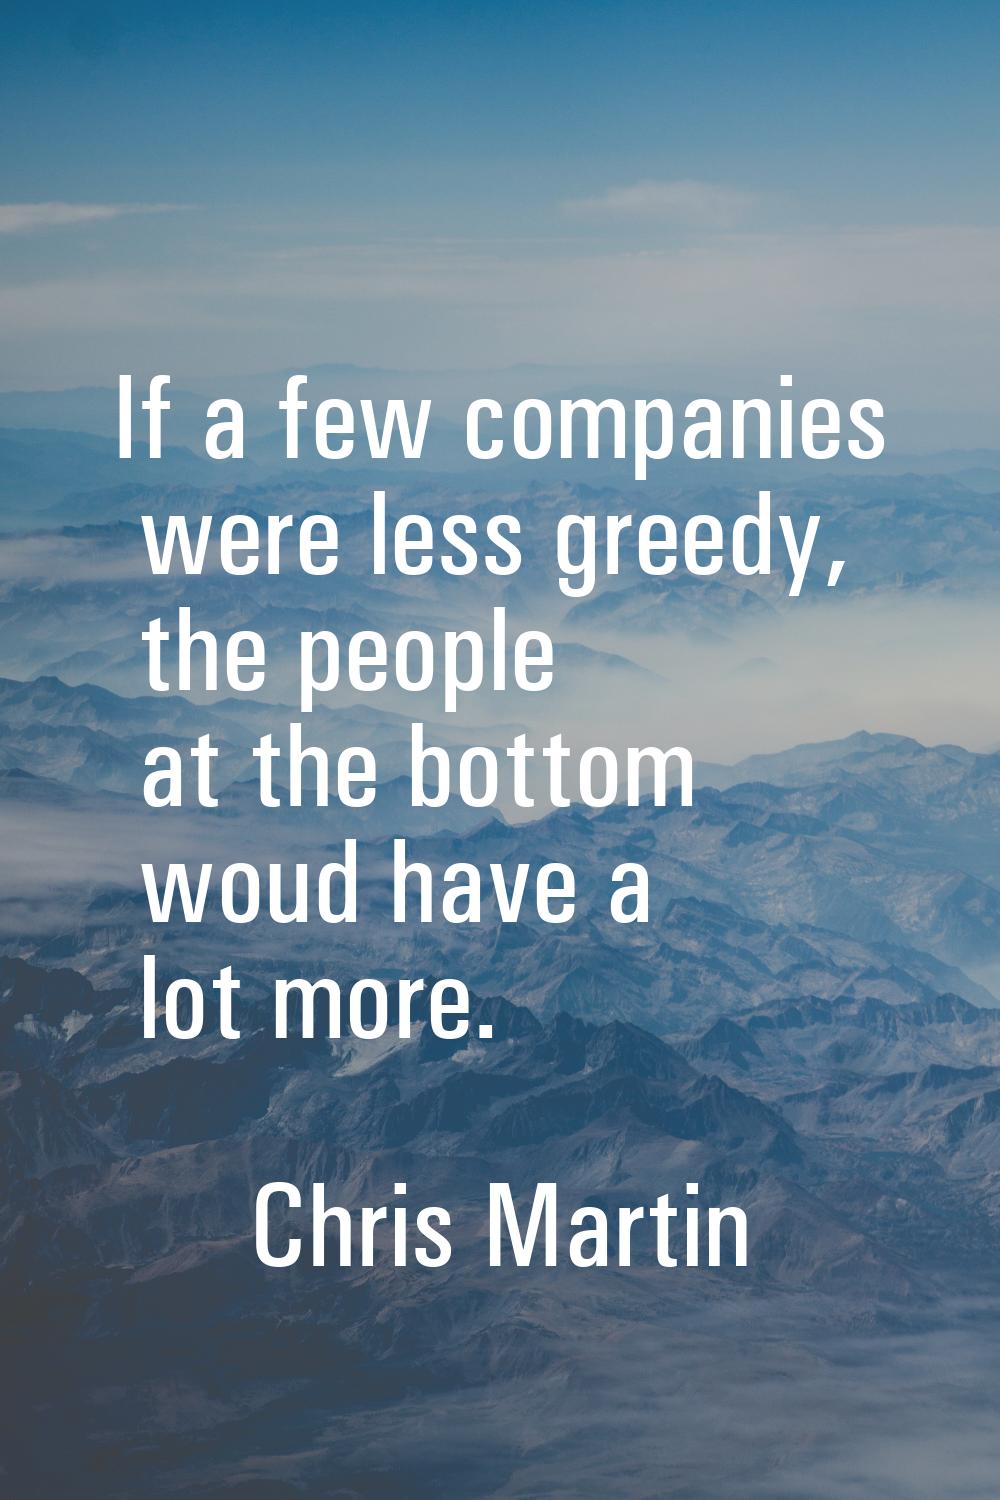 If a few companies were less greedy, the people at the bottom woud have a lot more.